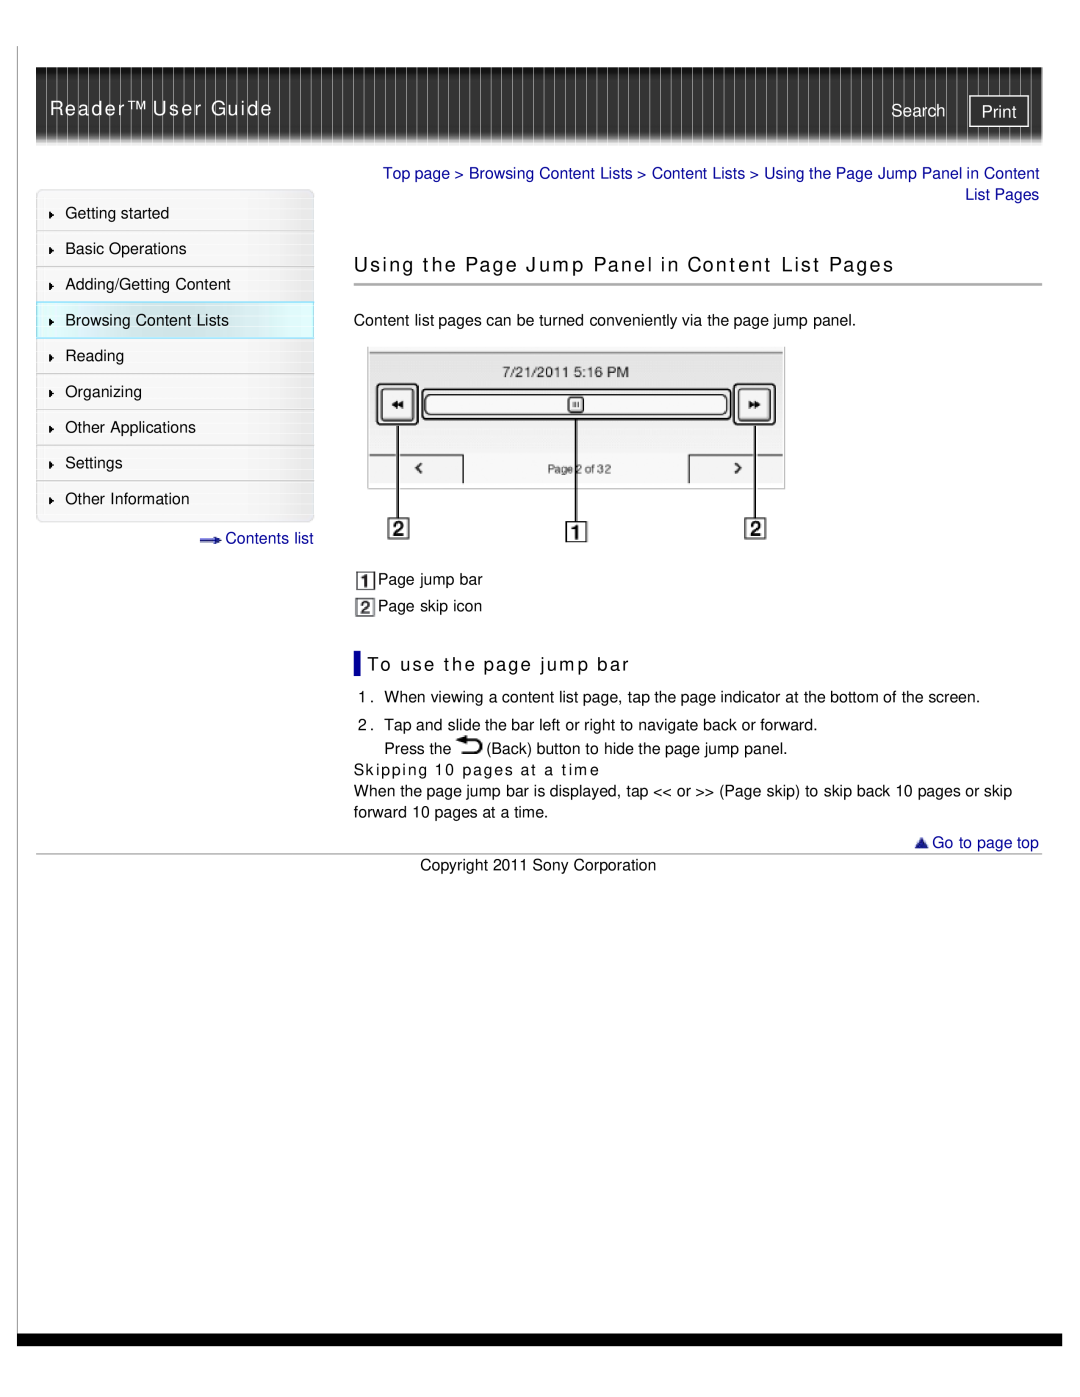 Sony PRS-T1WC Using the Page Jump Panel in Content List Pages, To use the page jump bar, Reader User Guide, Search, Print 